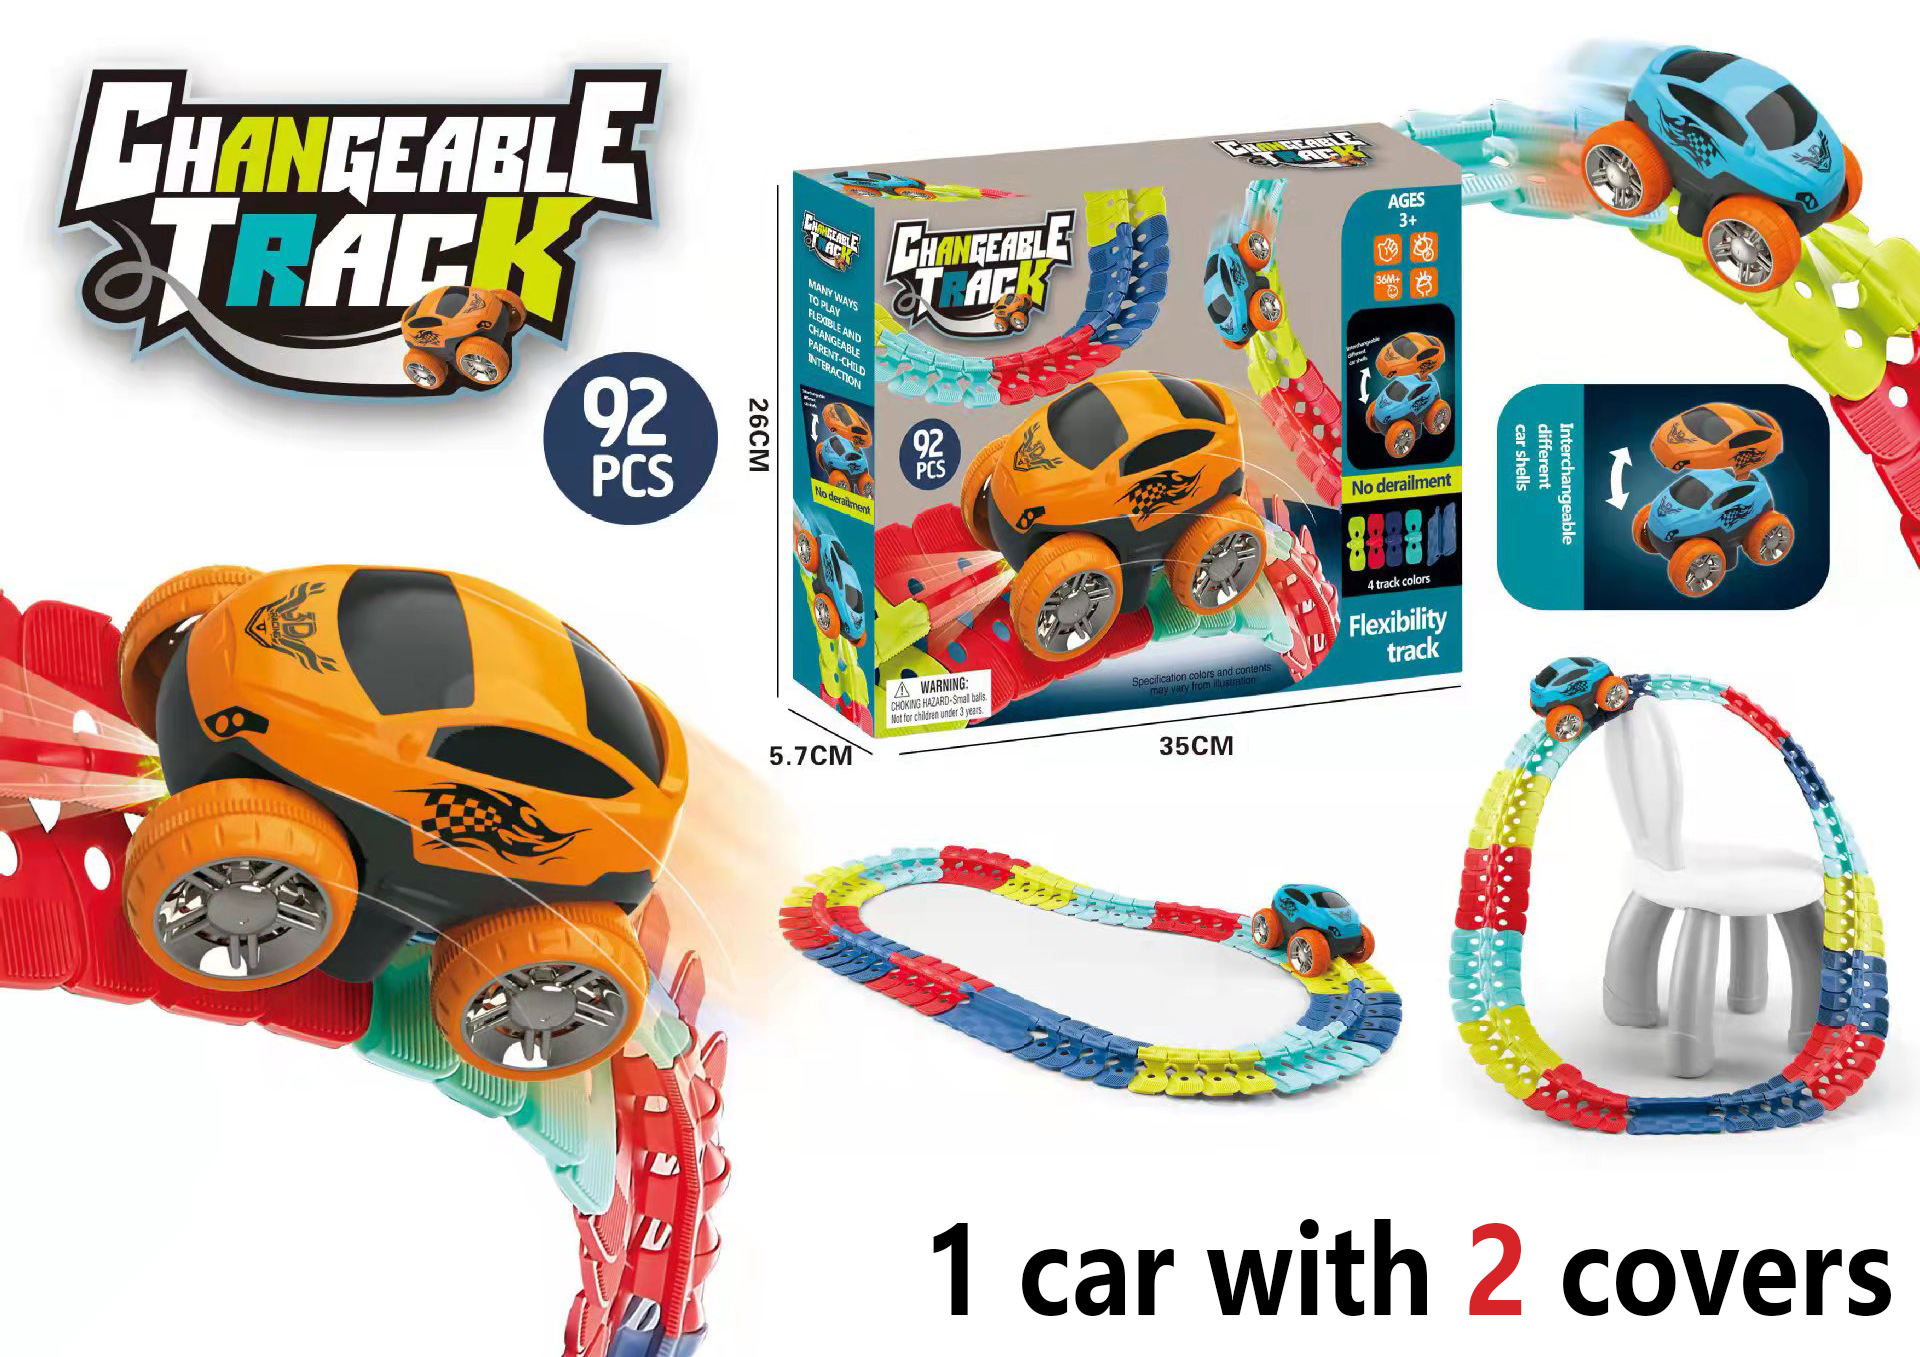 Genuine Changeable Track with LED Light-Up Race Car Racing Track Set Flexible Railway Assembled Track Birthday Gift for Kids Toy alx